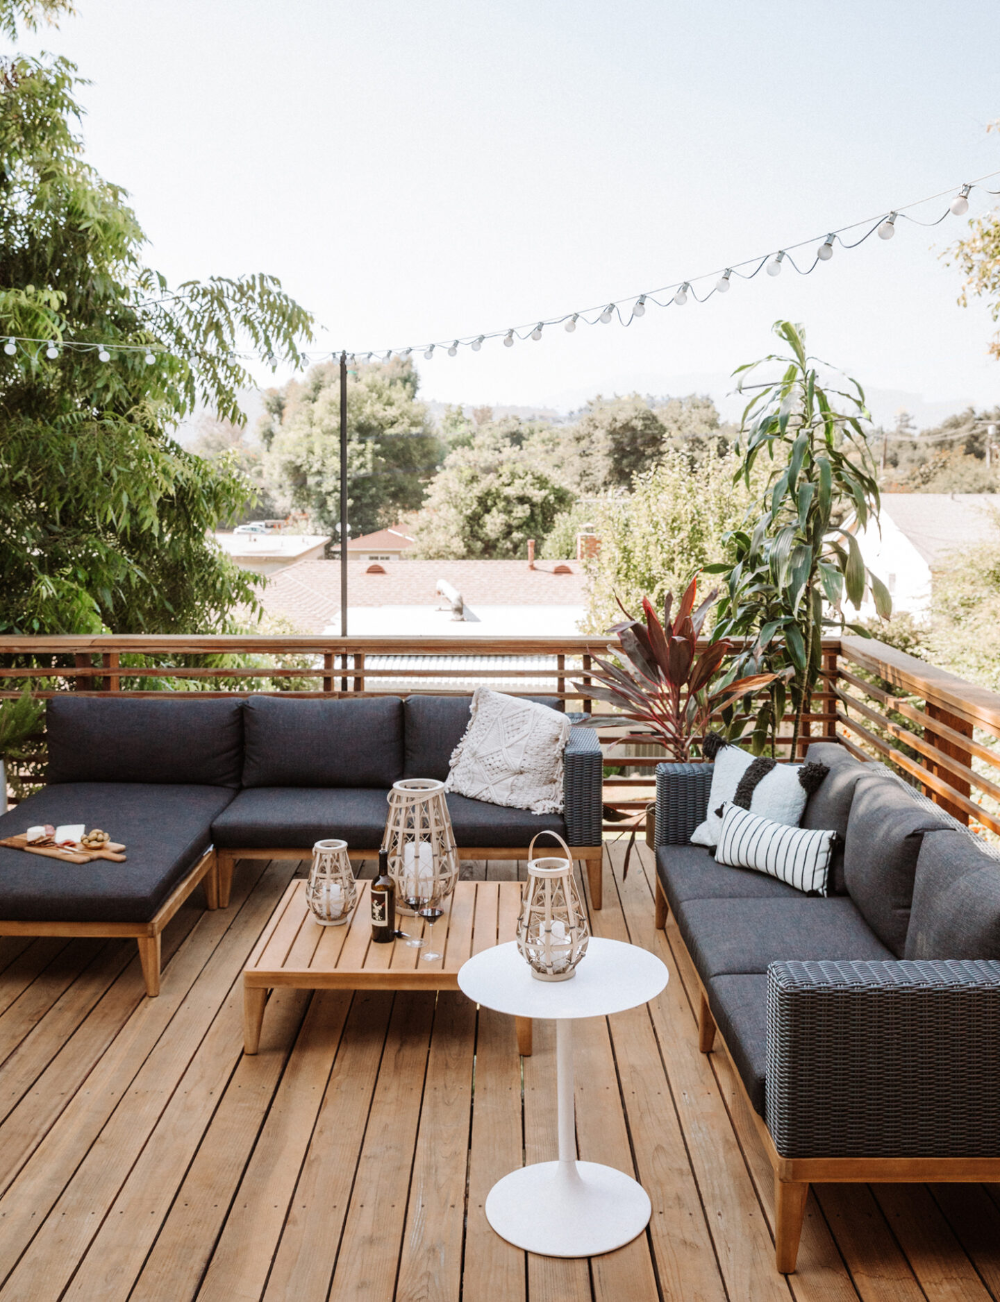 Choosing the Perfect Deck Furniture for
Your Home